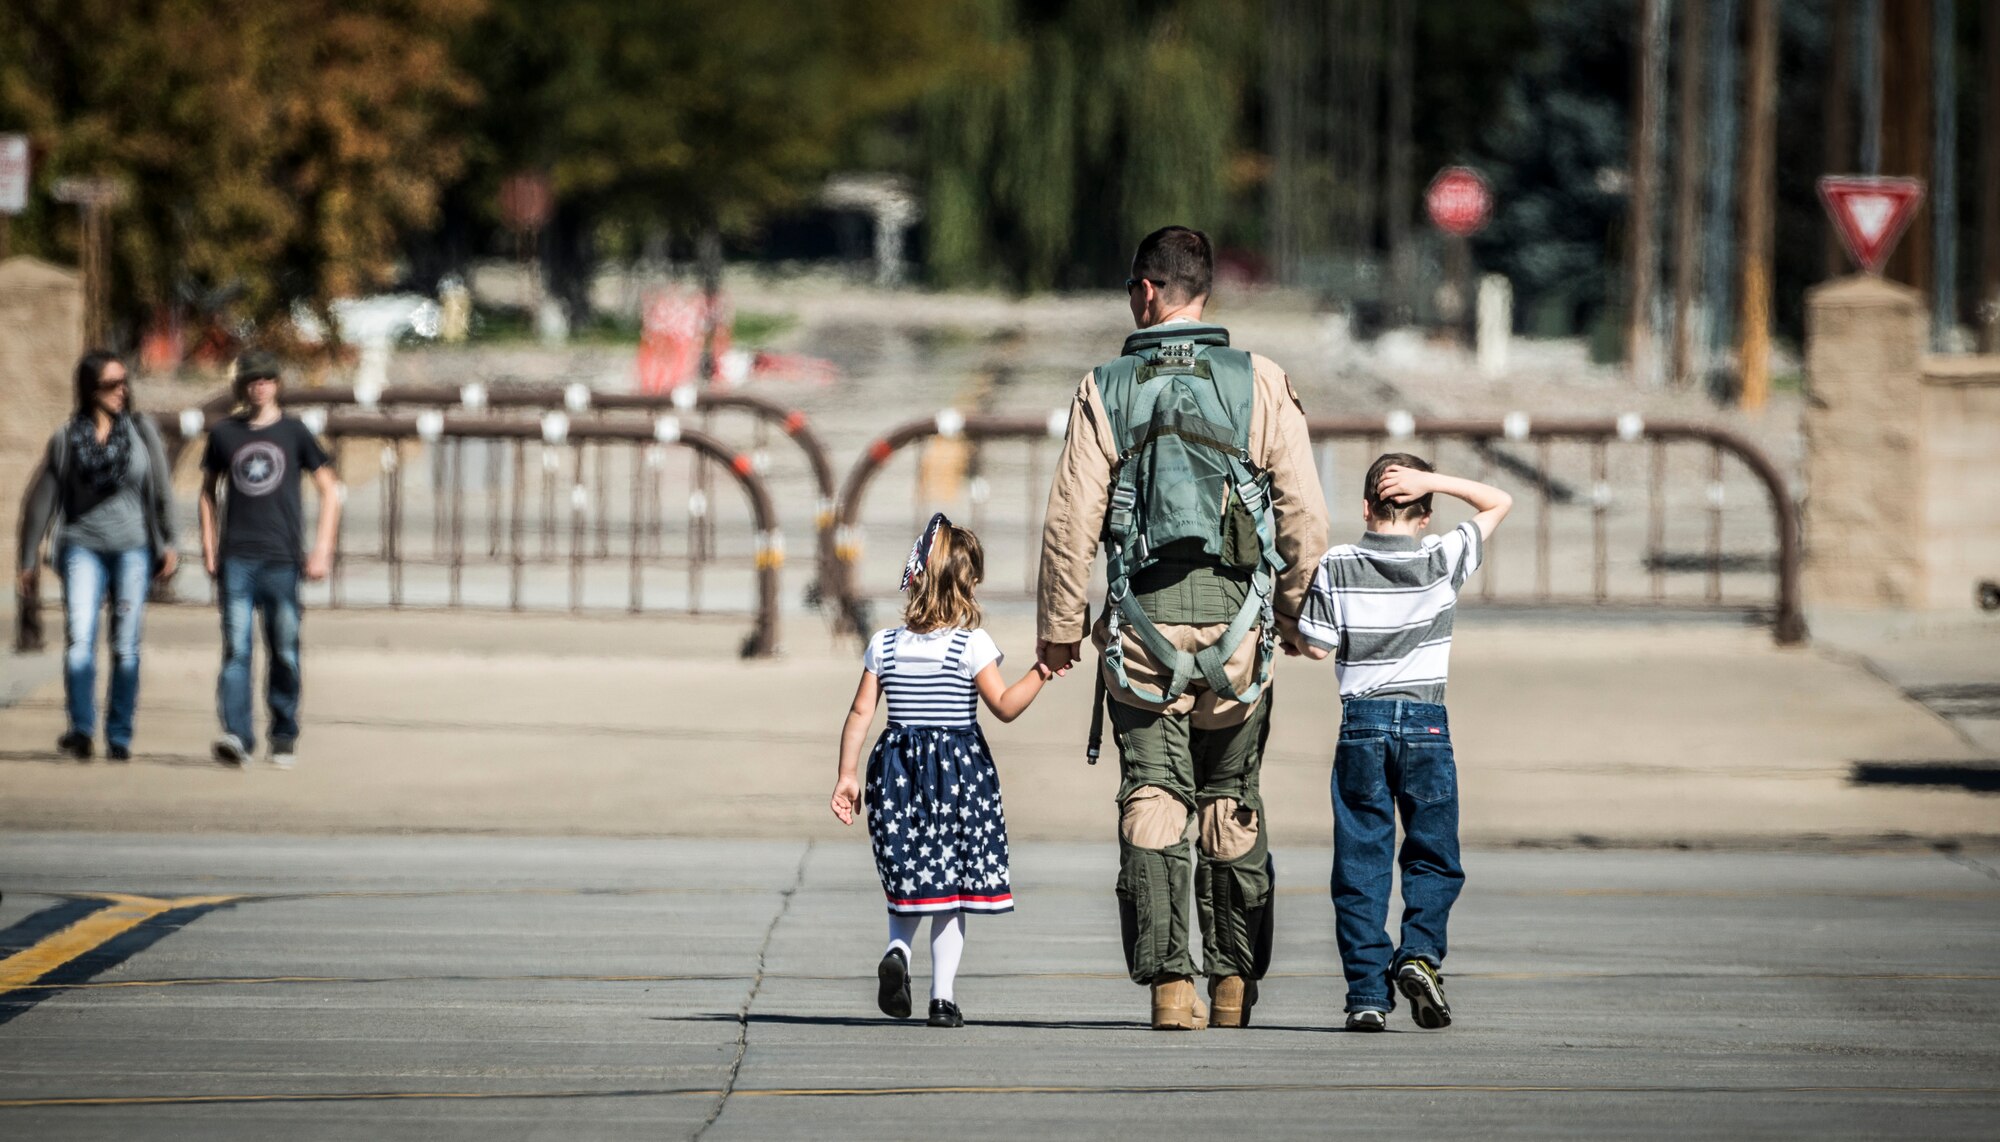 U.S. Air Force Lt. Col. Joel Meyers, 389th Fighter Squadron commander, walks with two of his children, reunited, at Mountain Home Air Force Base, Idaho, Oct. 5, 2013. Meyers was deployed with the 389th FS to Southwest Asia and had just returned that day. (U.S. Air Force photo by Tech. Sgt. Samuel Morse/RELEASED)